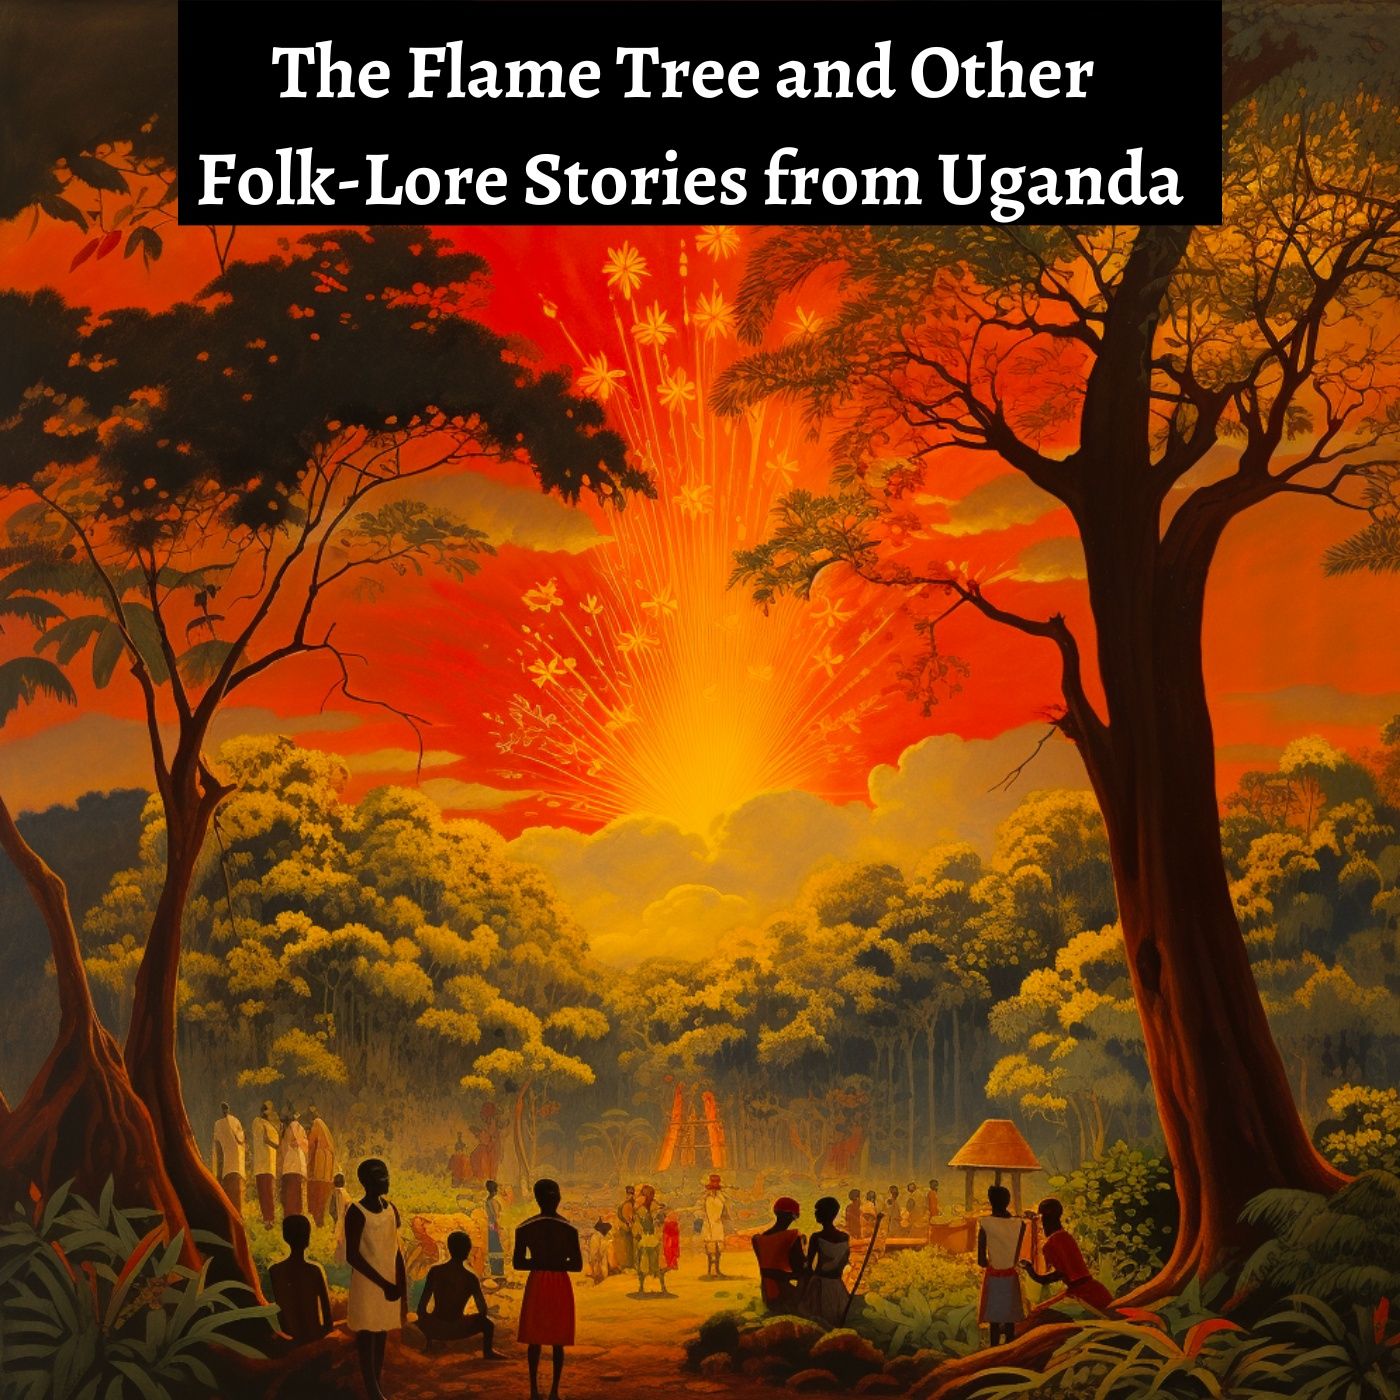 The Flame Tree and Other Folk-Lore Stories from Uganda